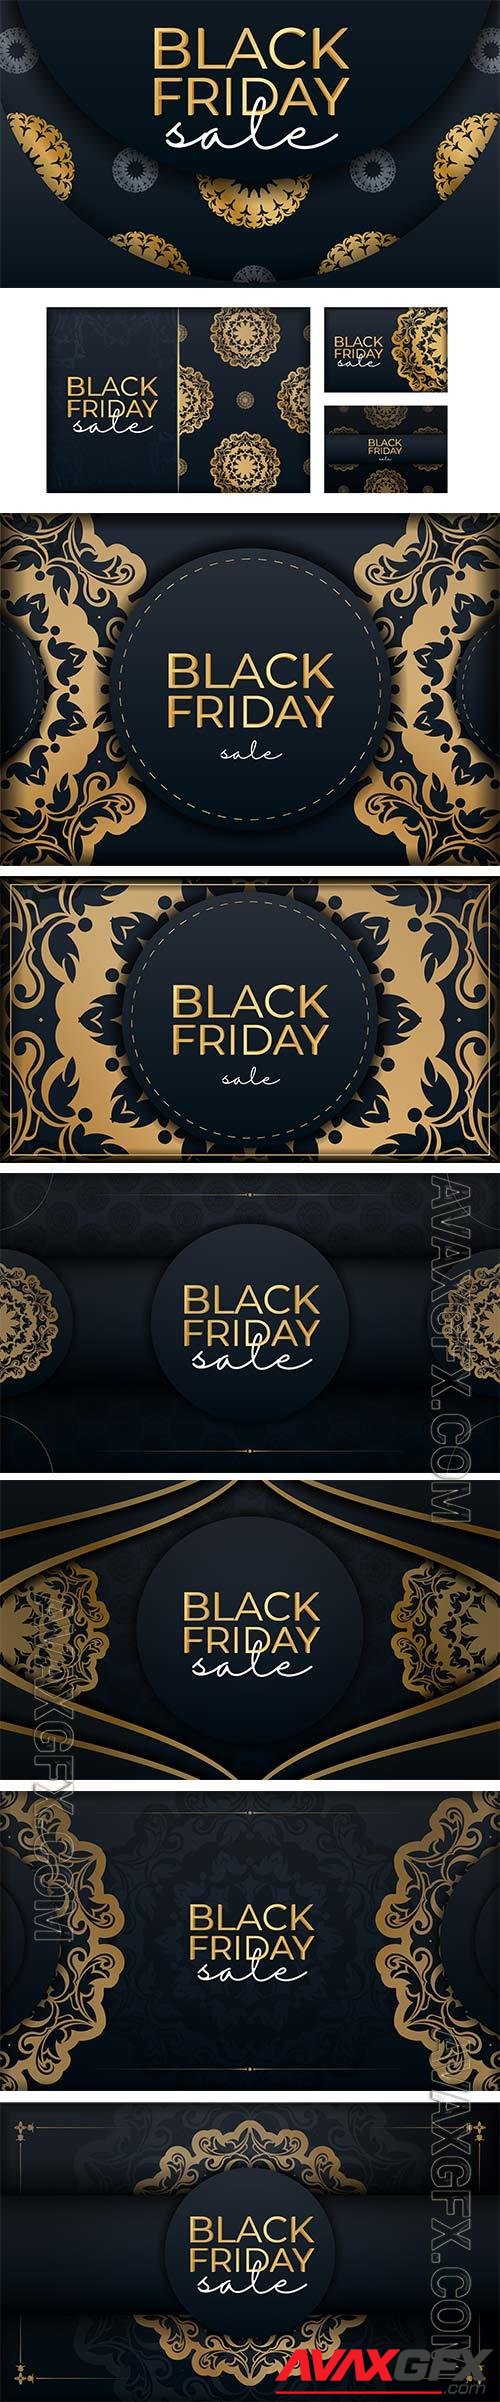 Black friday sale poster with vintage gold pattern premium vector